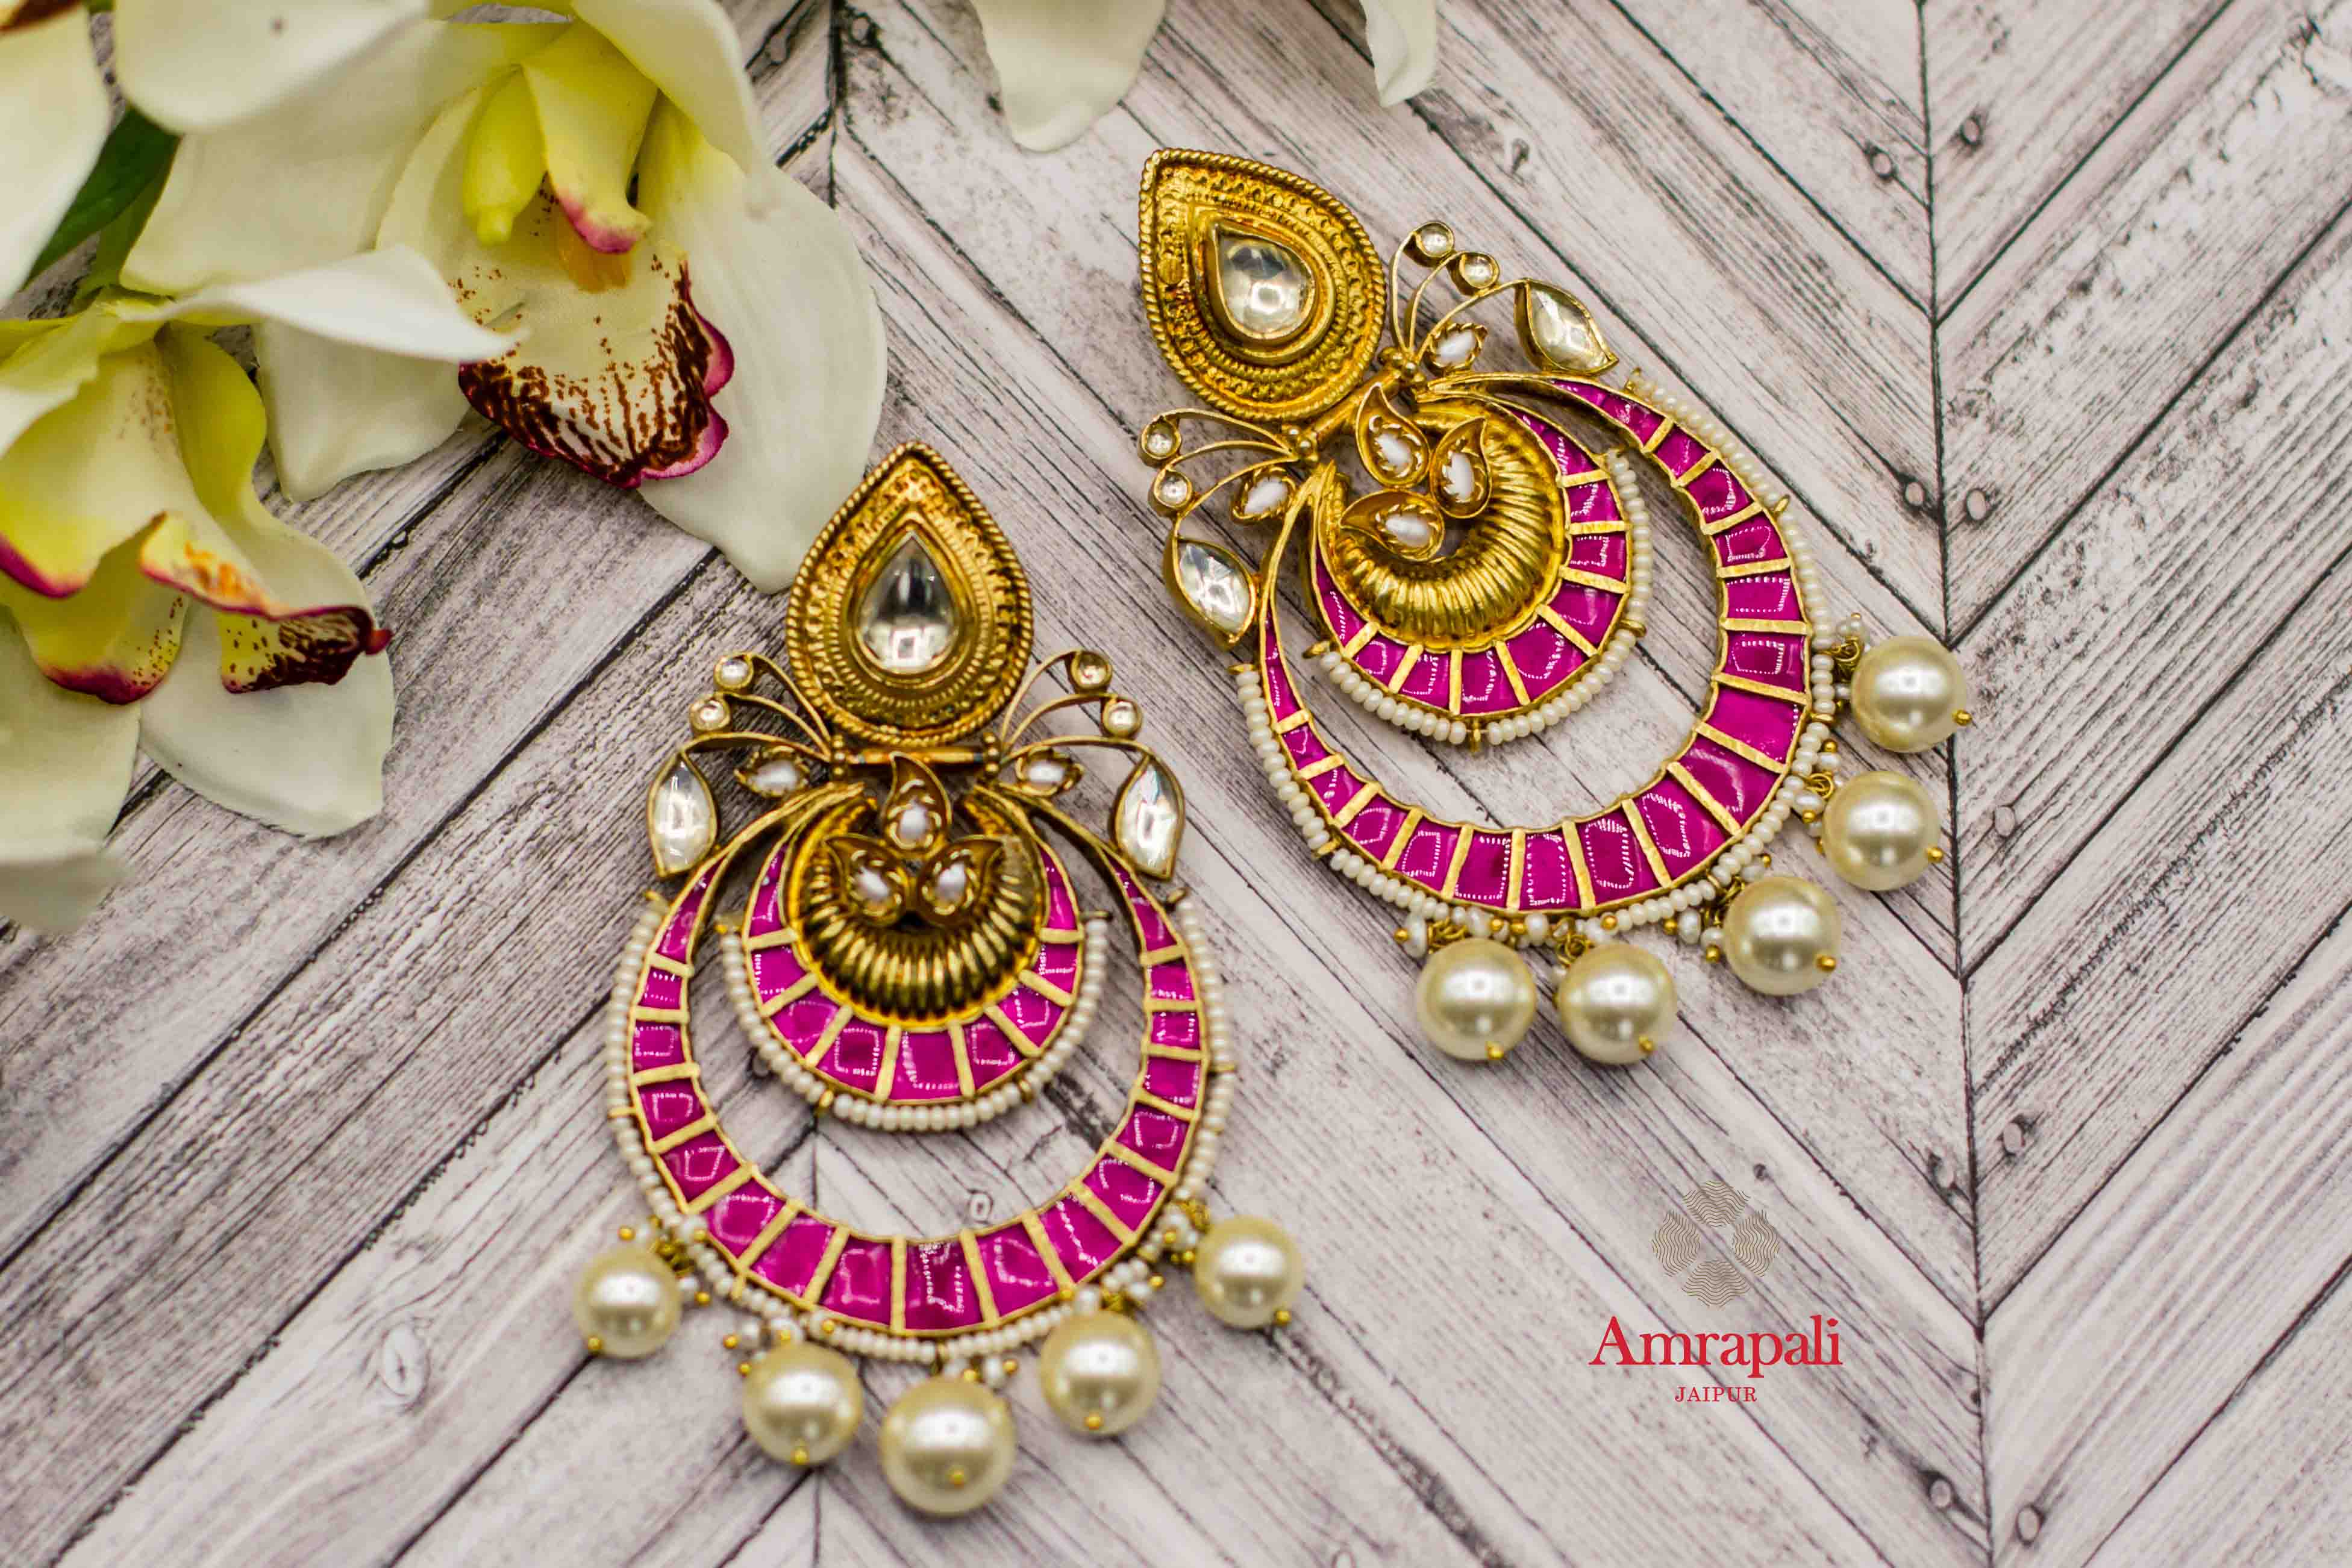 Buy Amrapali silver gold plated glass pearl chandbali earrings online in USA. Complete your ethnic look with traditional Indian silver gold plated jewelry from Pure Elegance Indian fashion store in USA. Shop gold plated necklaces, wedding jewelry for Indian brides in USA from our online store.-flatlay